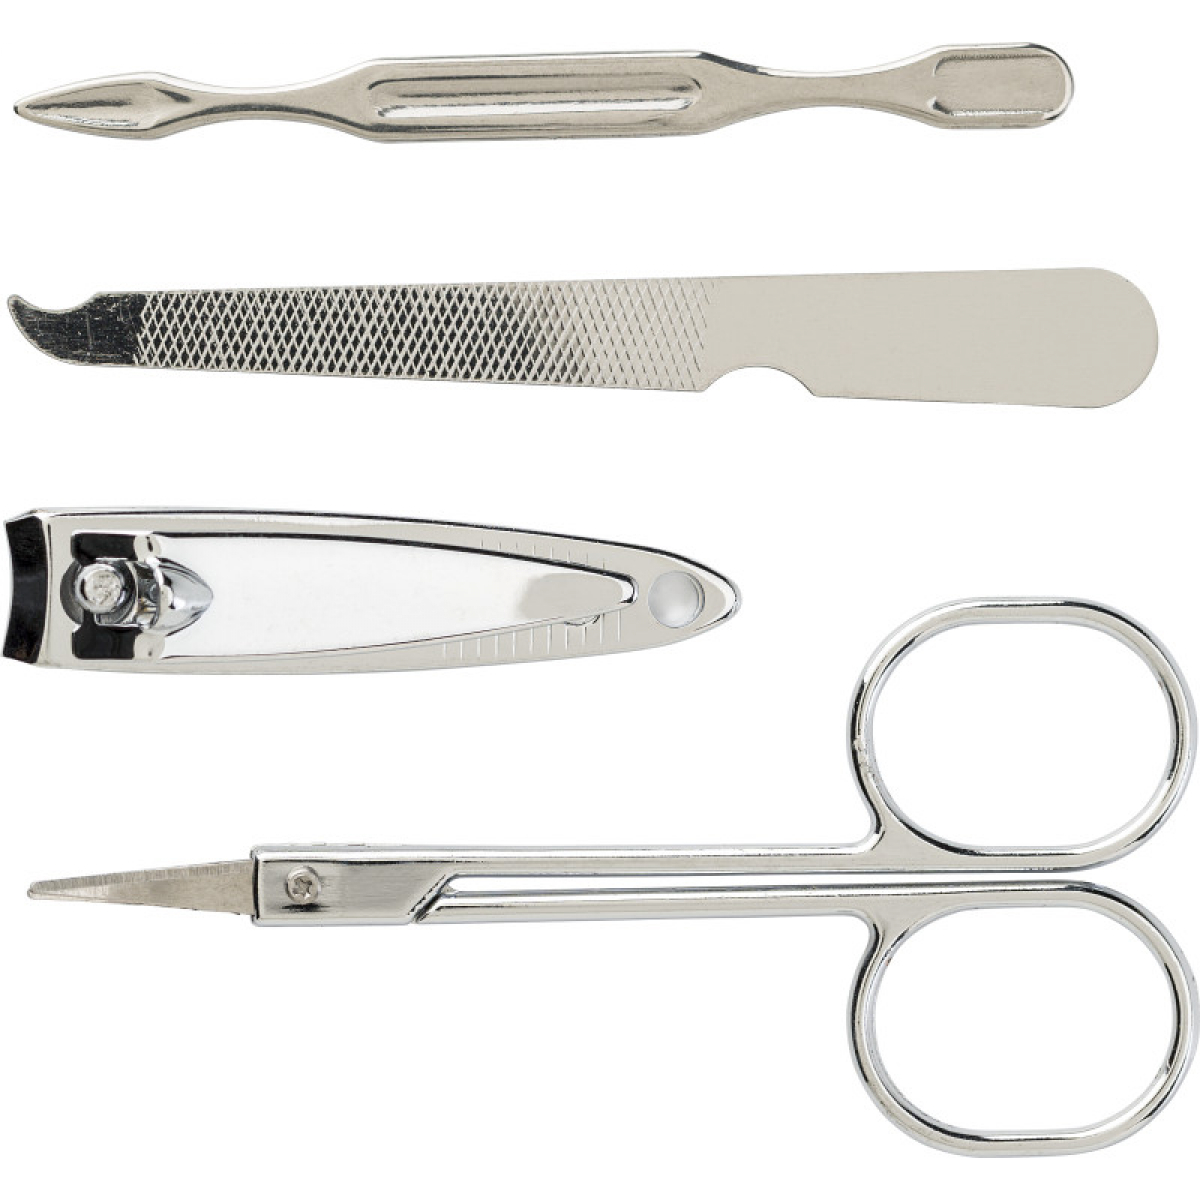 manicure set | ABS container | vier tools 